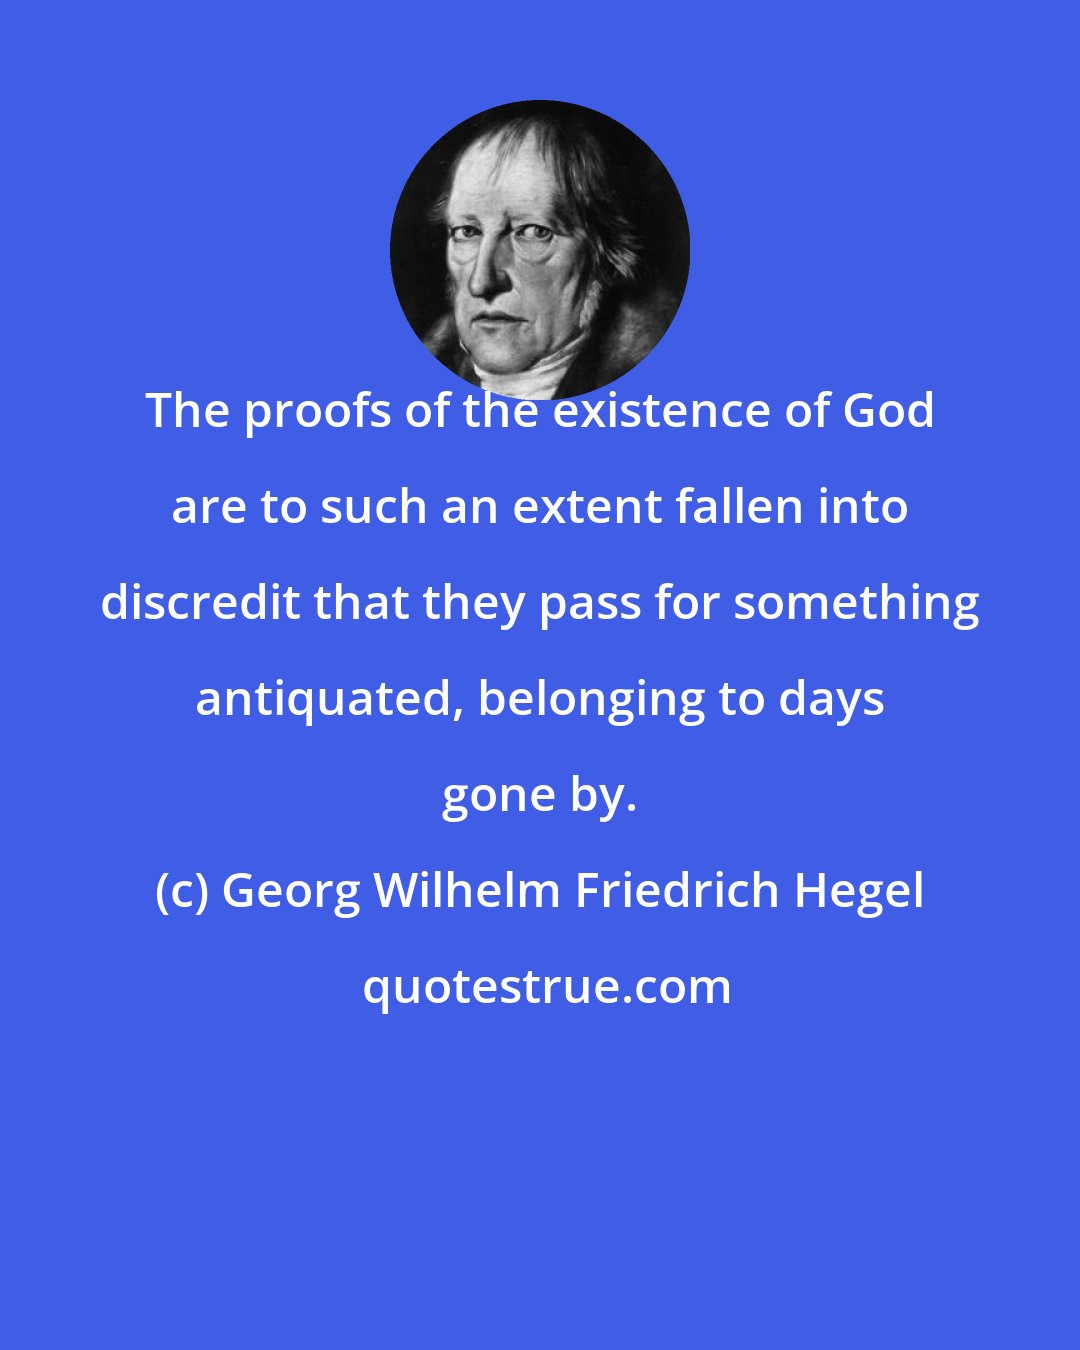 Georg Wilhelm Friedrich Hegel: The proofs of the existence of God are to such an extent fallen into discredit that they pass for something antiquated, belonging to days gone by.